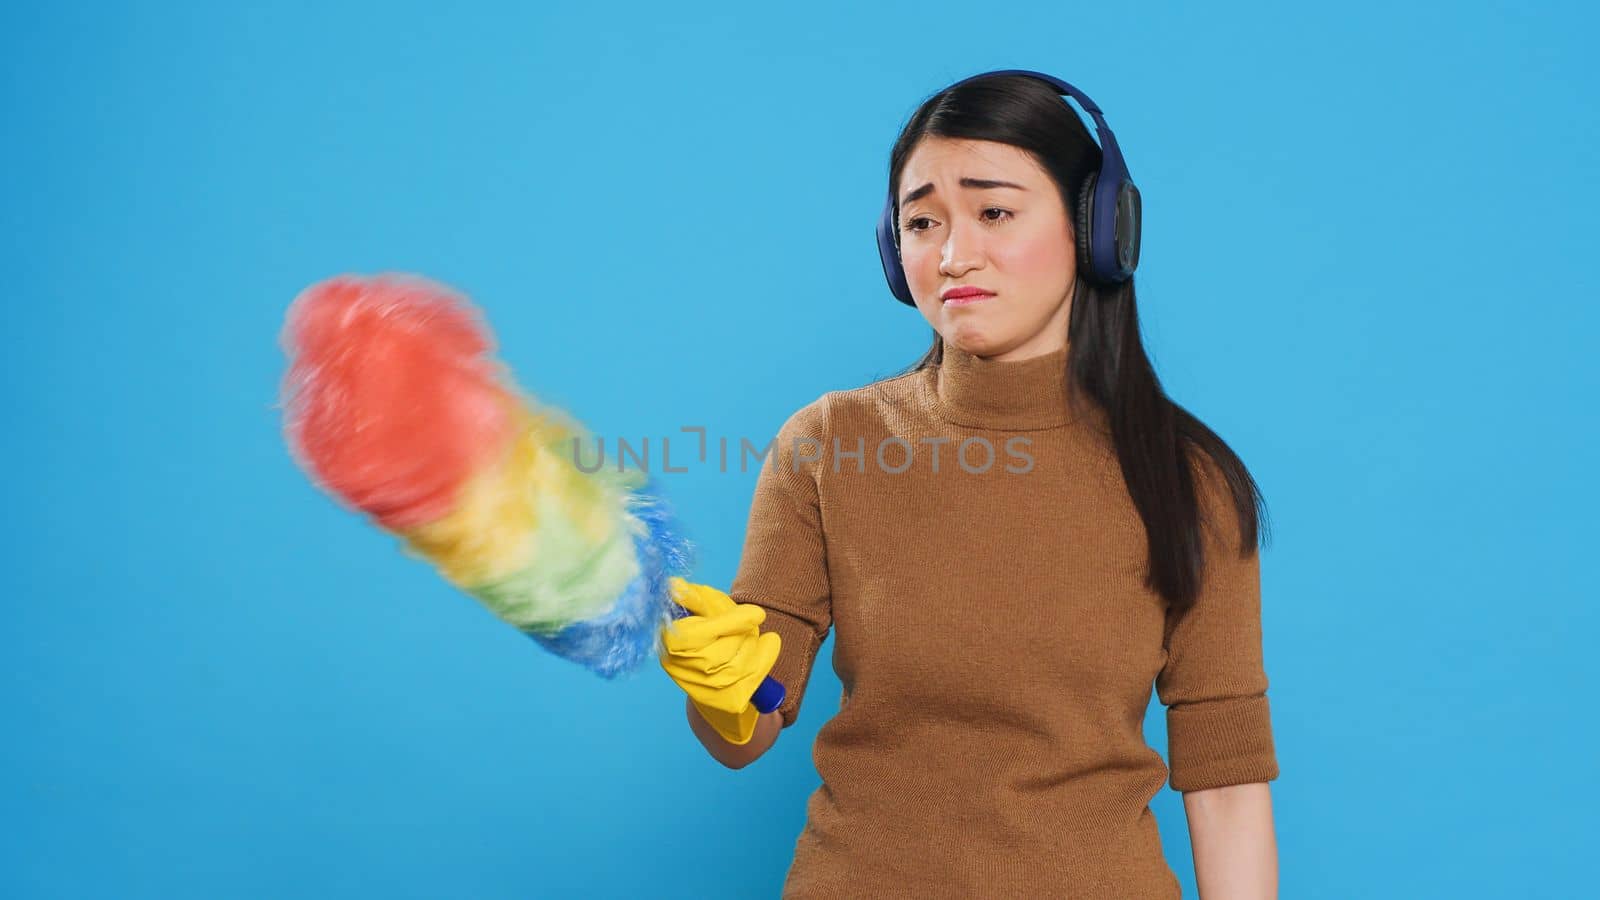 Exhausted sleepy housekeeper wearing headphones while doing cleaning in house using feather duster, yawning in front of camera. Overwhelmed maid role was vital to the cleanliness of many homes